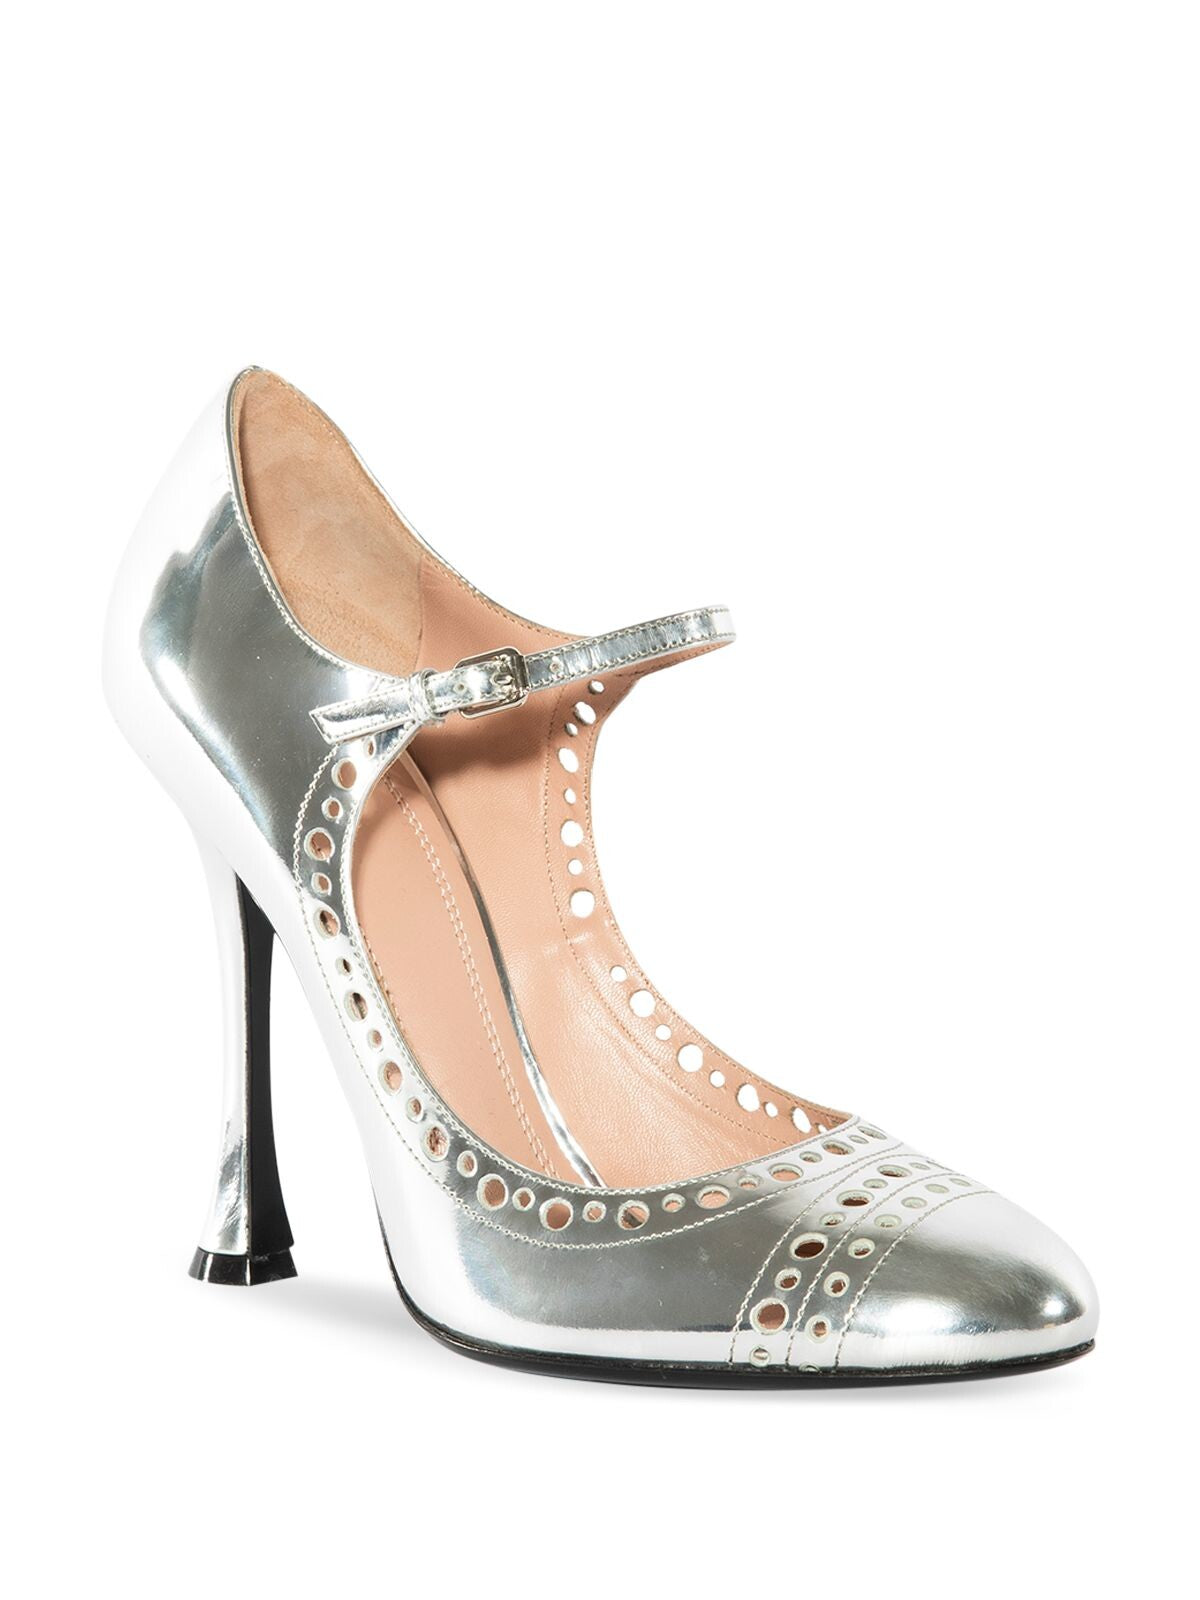 GIAMBATTISTA VALLI Womens Silver Mary Jane Metallic Perforated Padded Round Toe Stiletto Buckle Leather Pumps Shoes 37